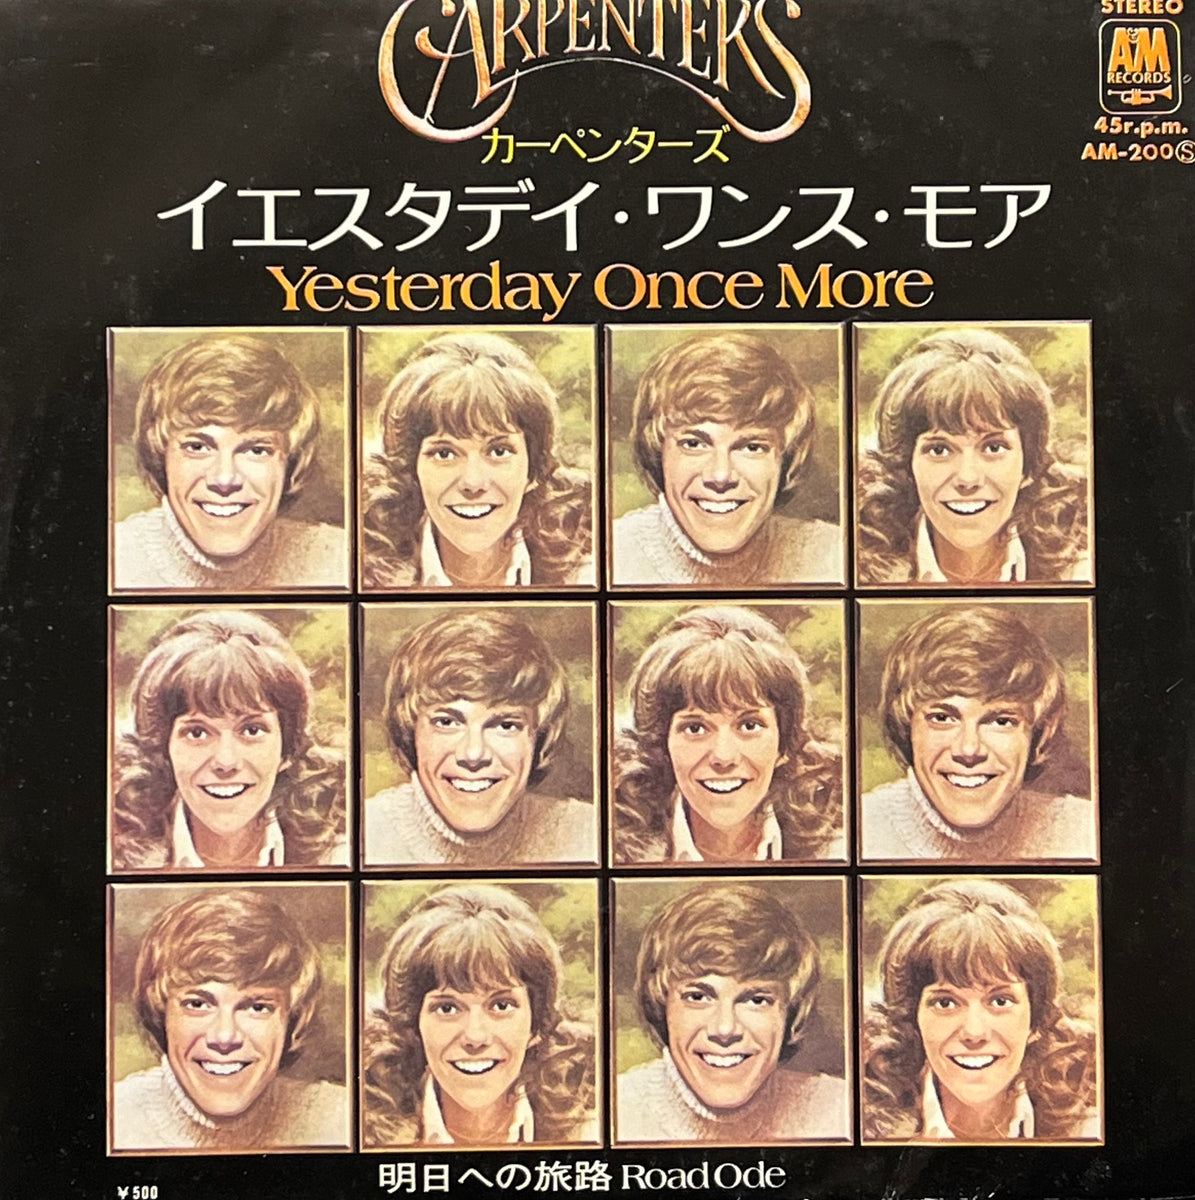 CARPENTERS / Yesterday Once More (AM-200